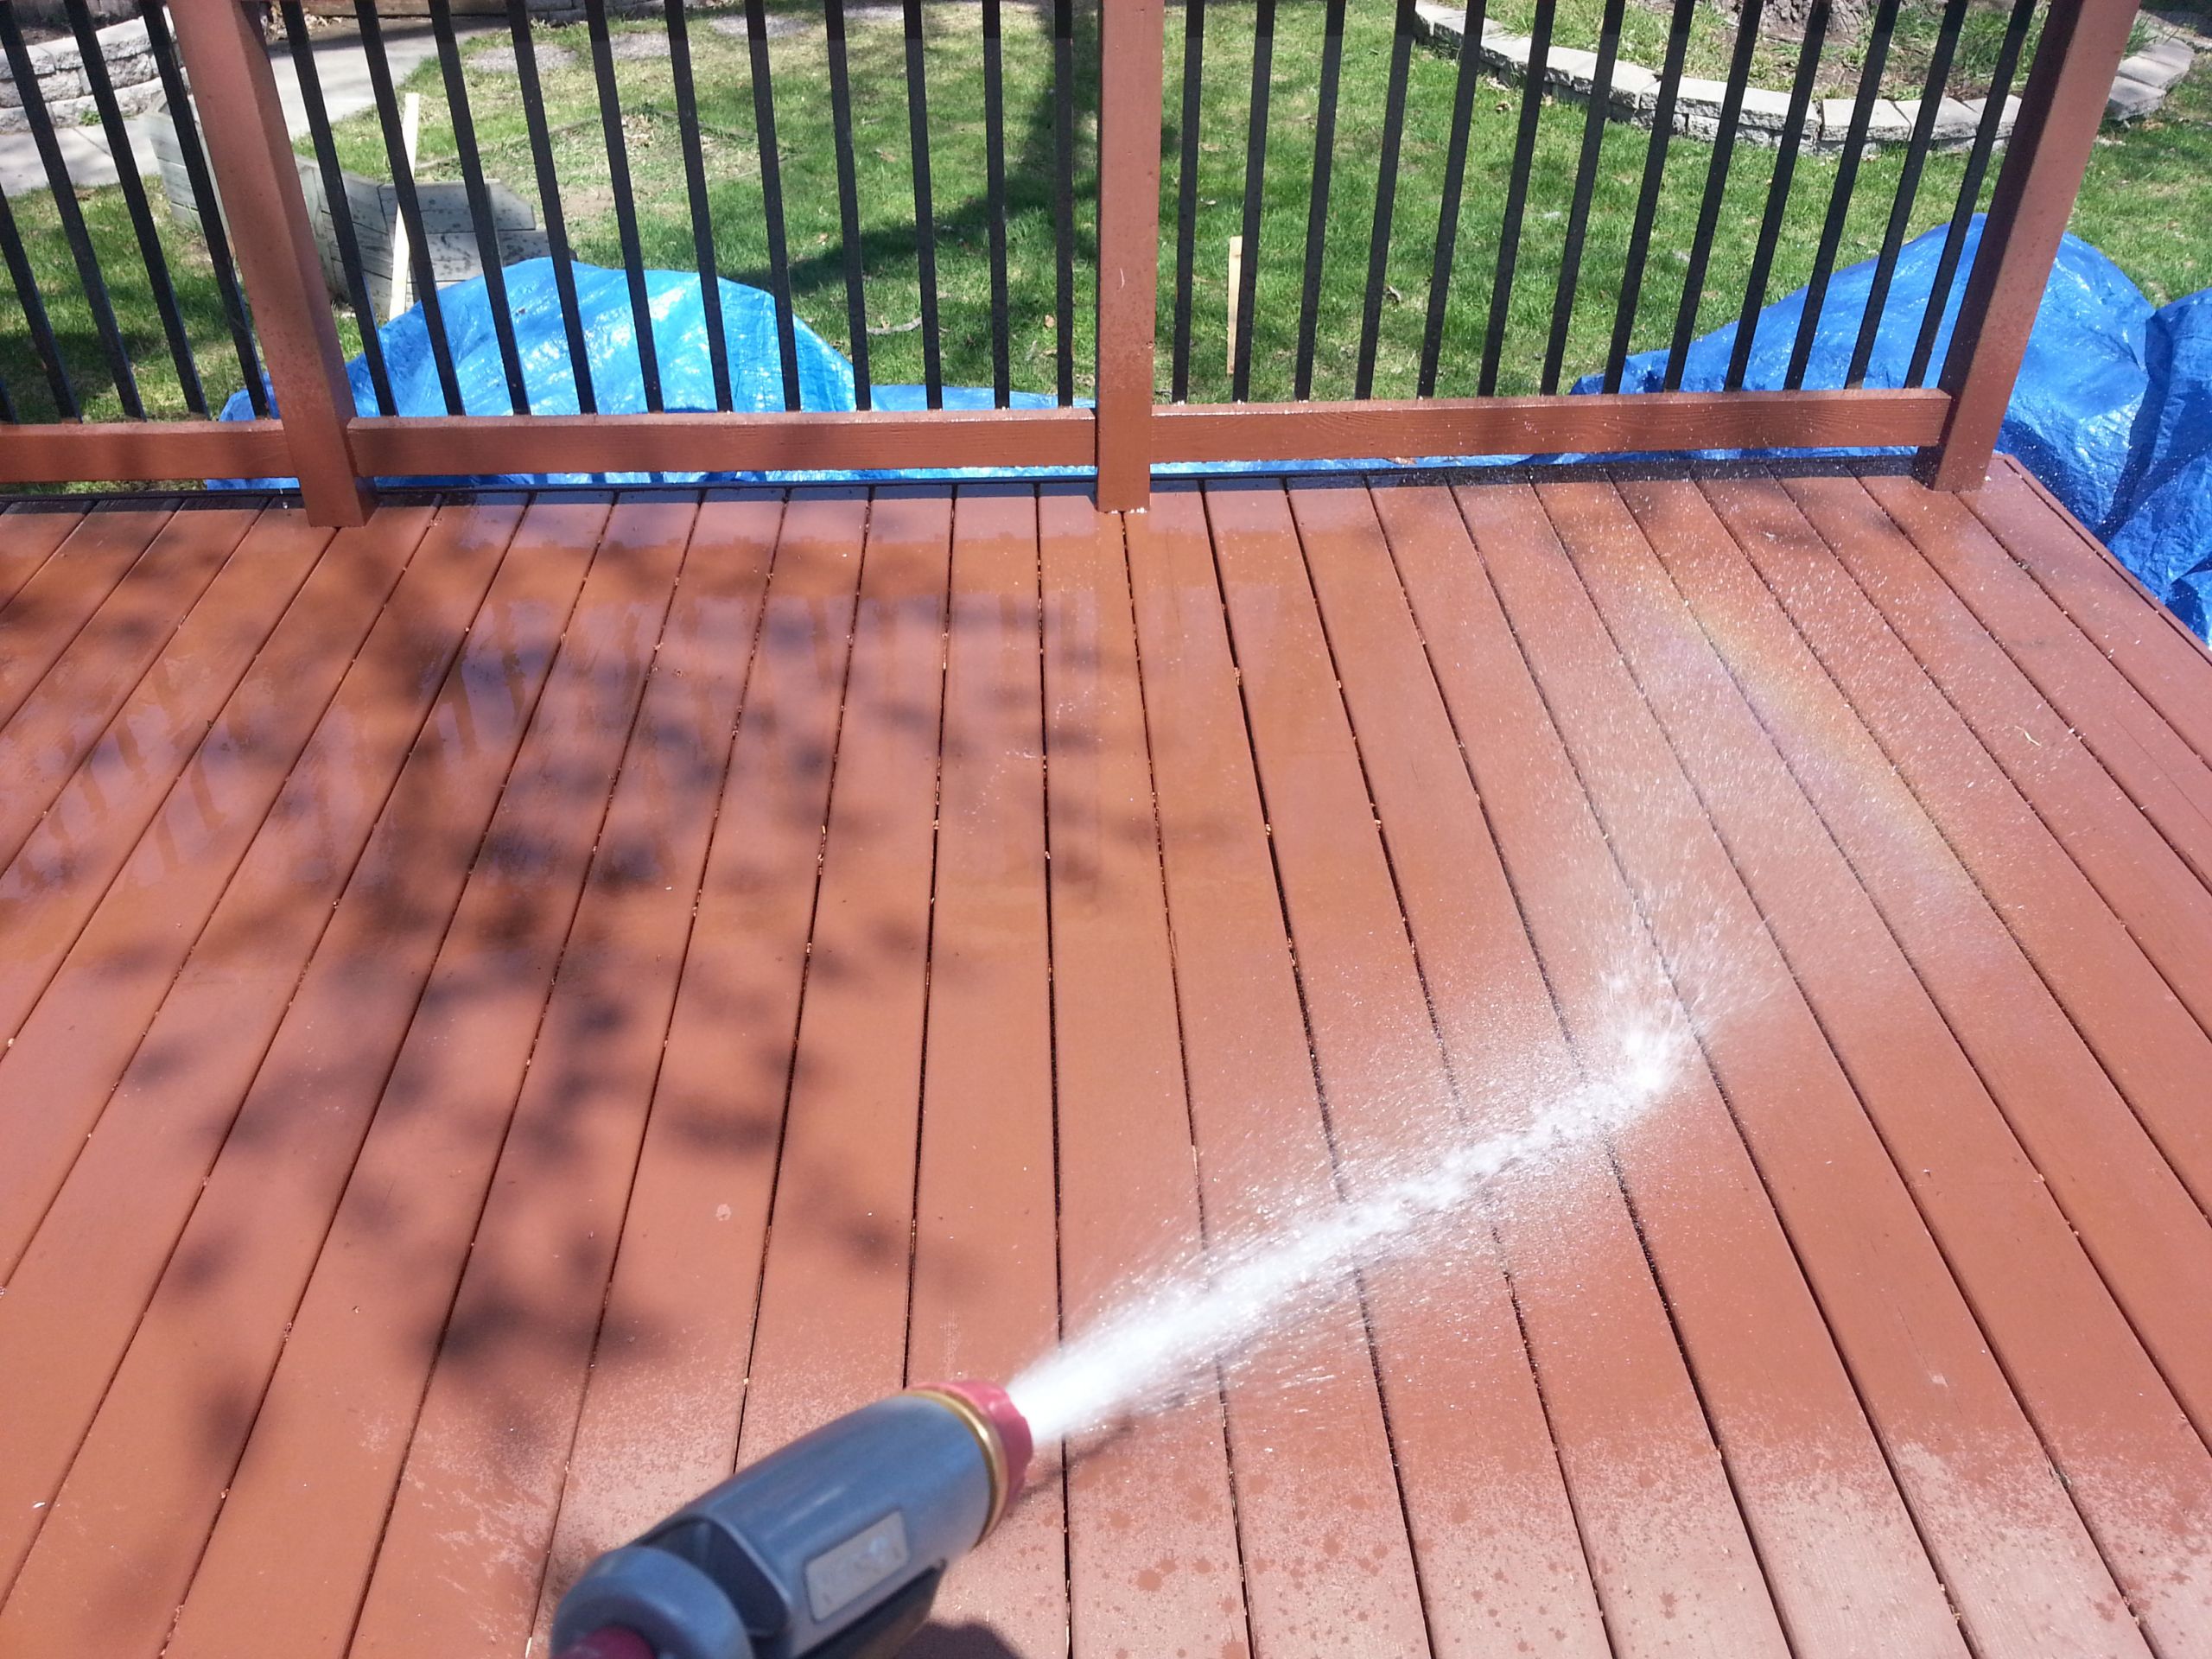 Lowes Deck Paint Restore
 Decor Lowes Deck Design With Stunning Wood Fence For